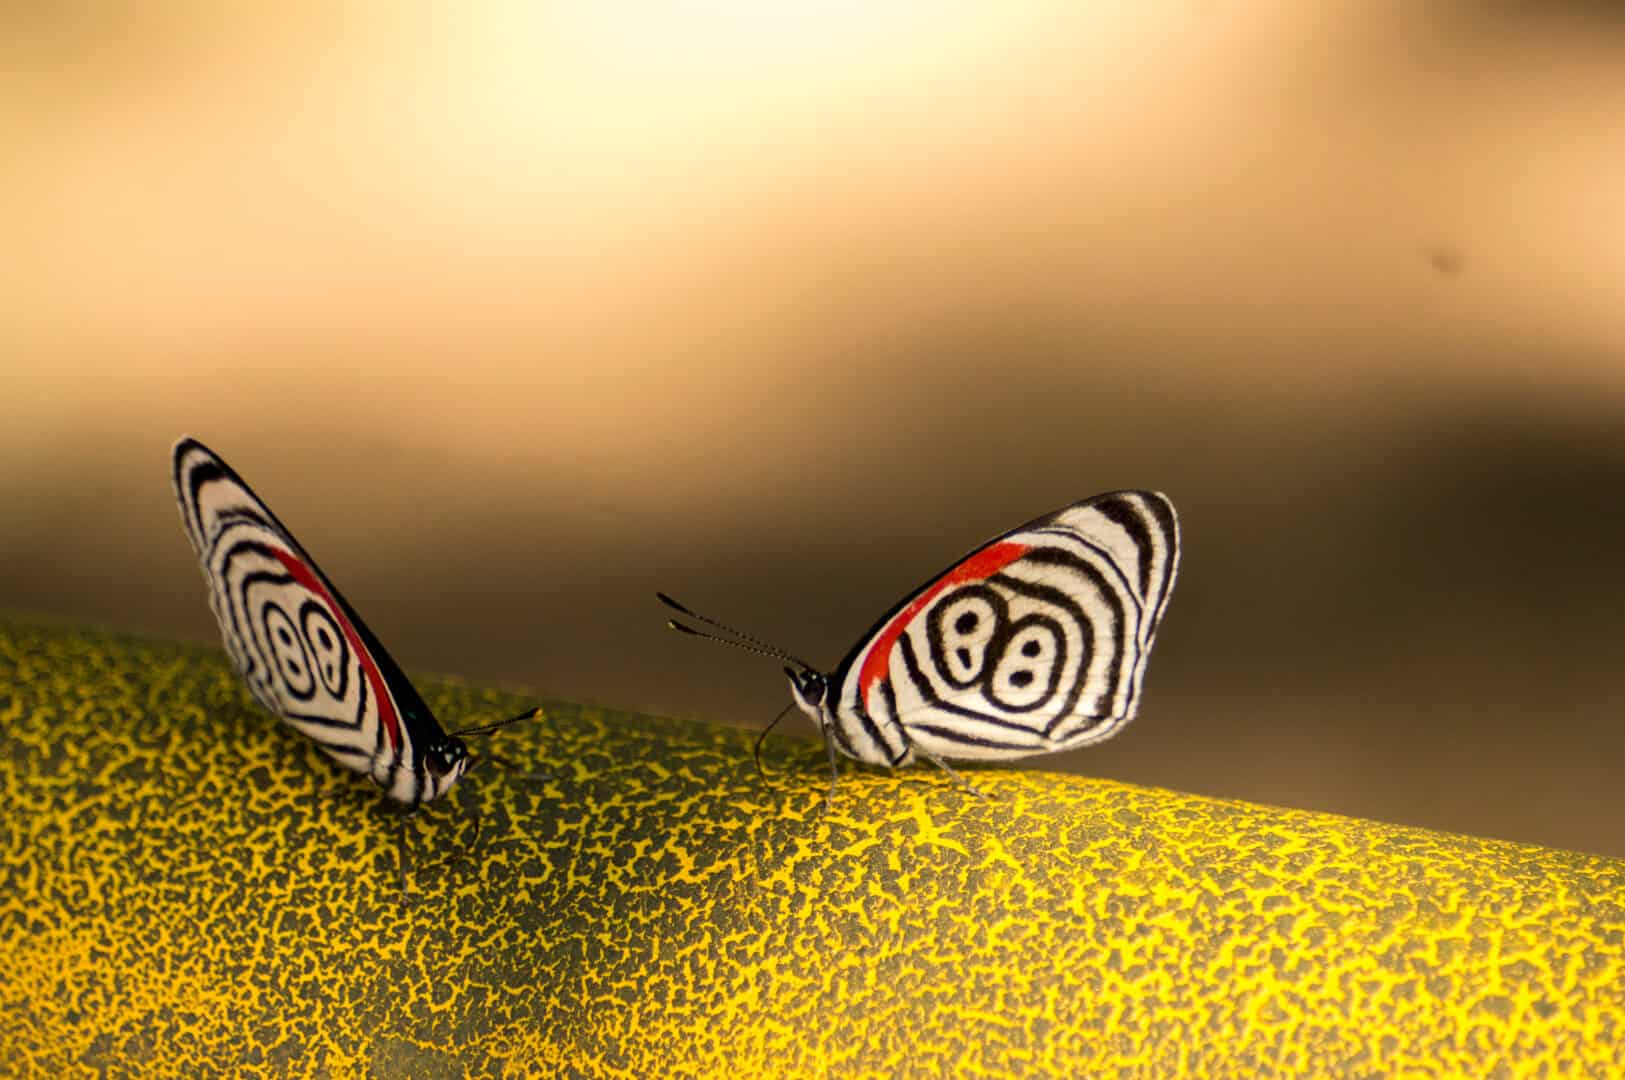 The 88 butterfly